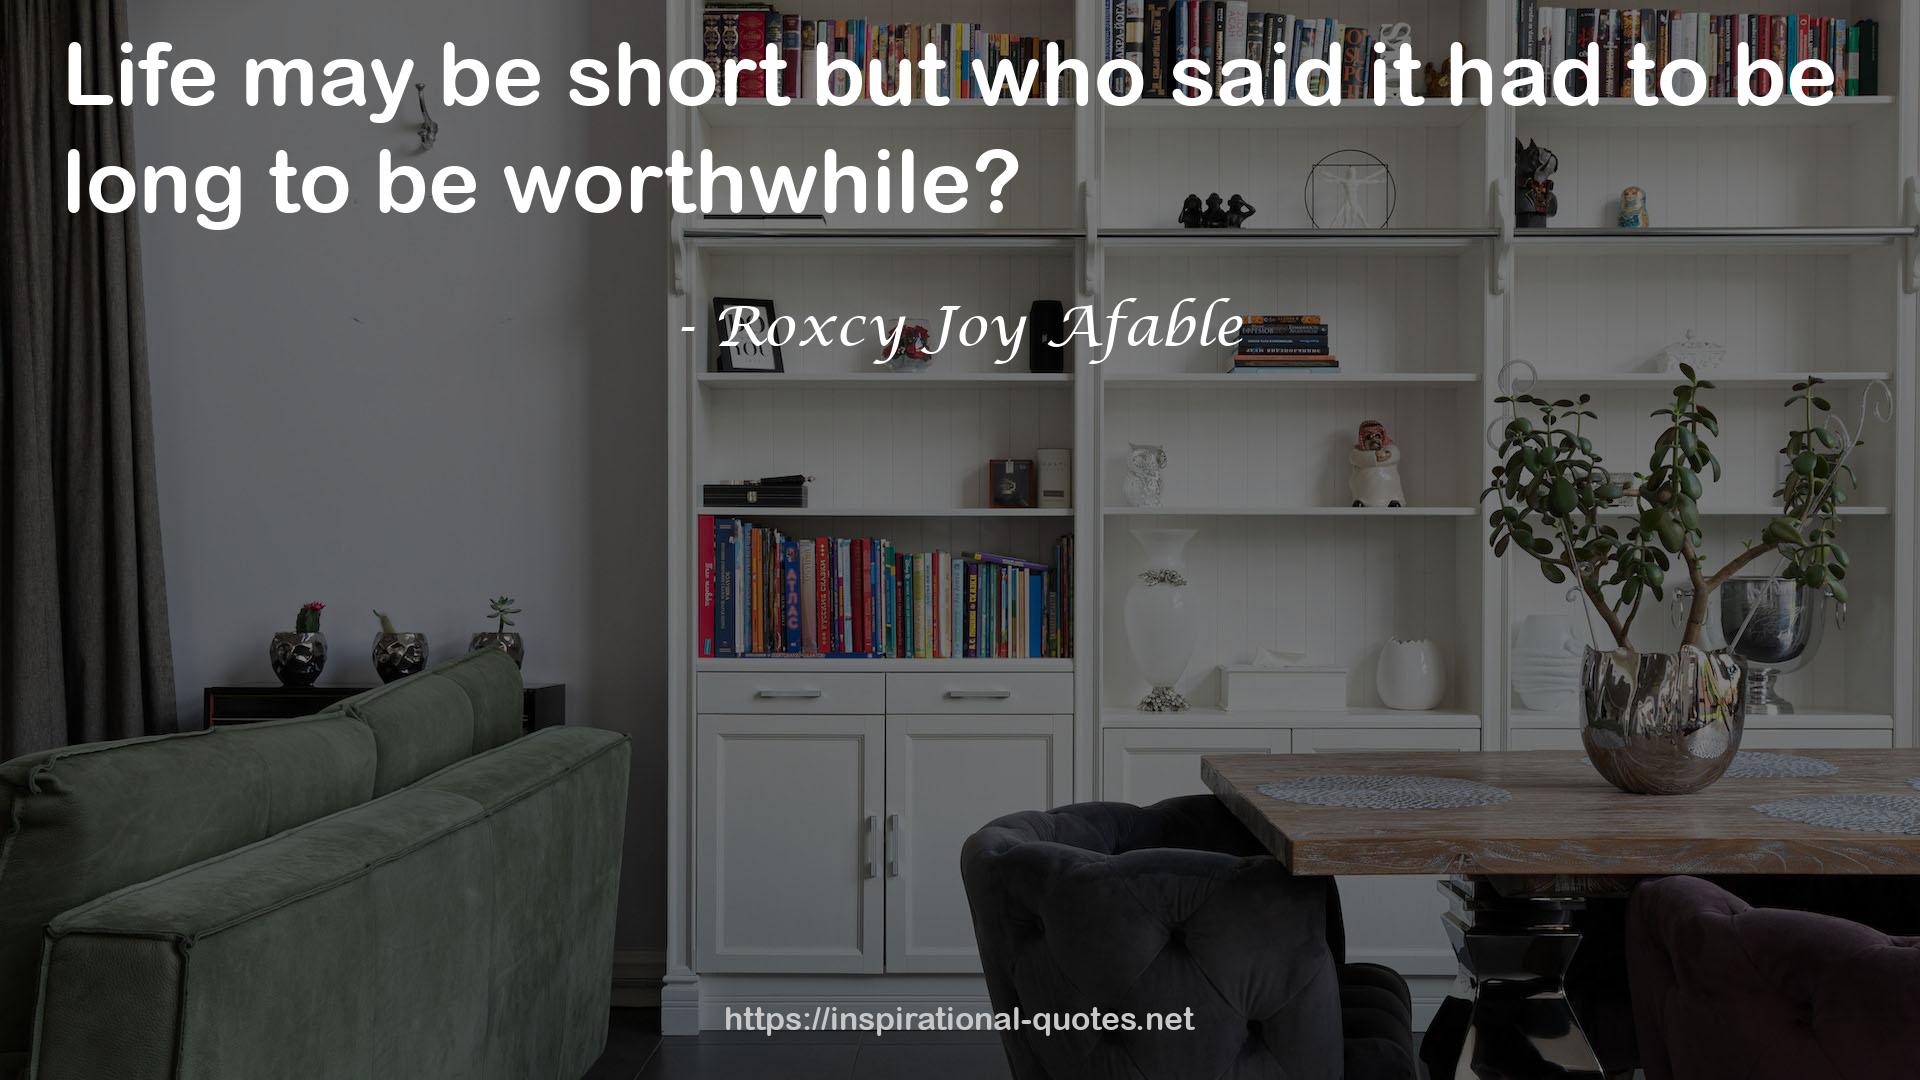 Roxcy Joy Afable QUOTES